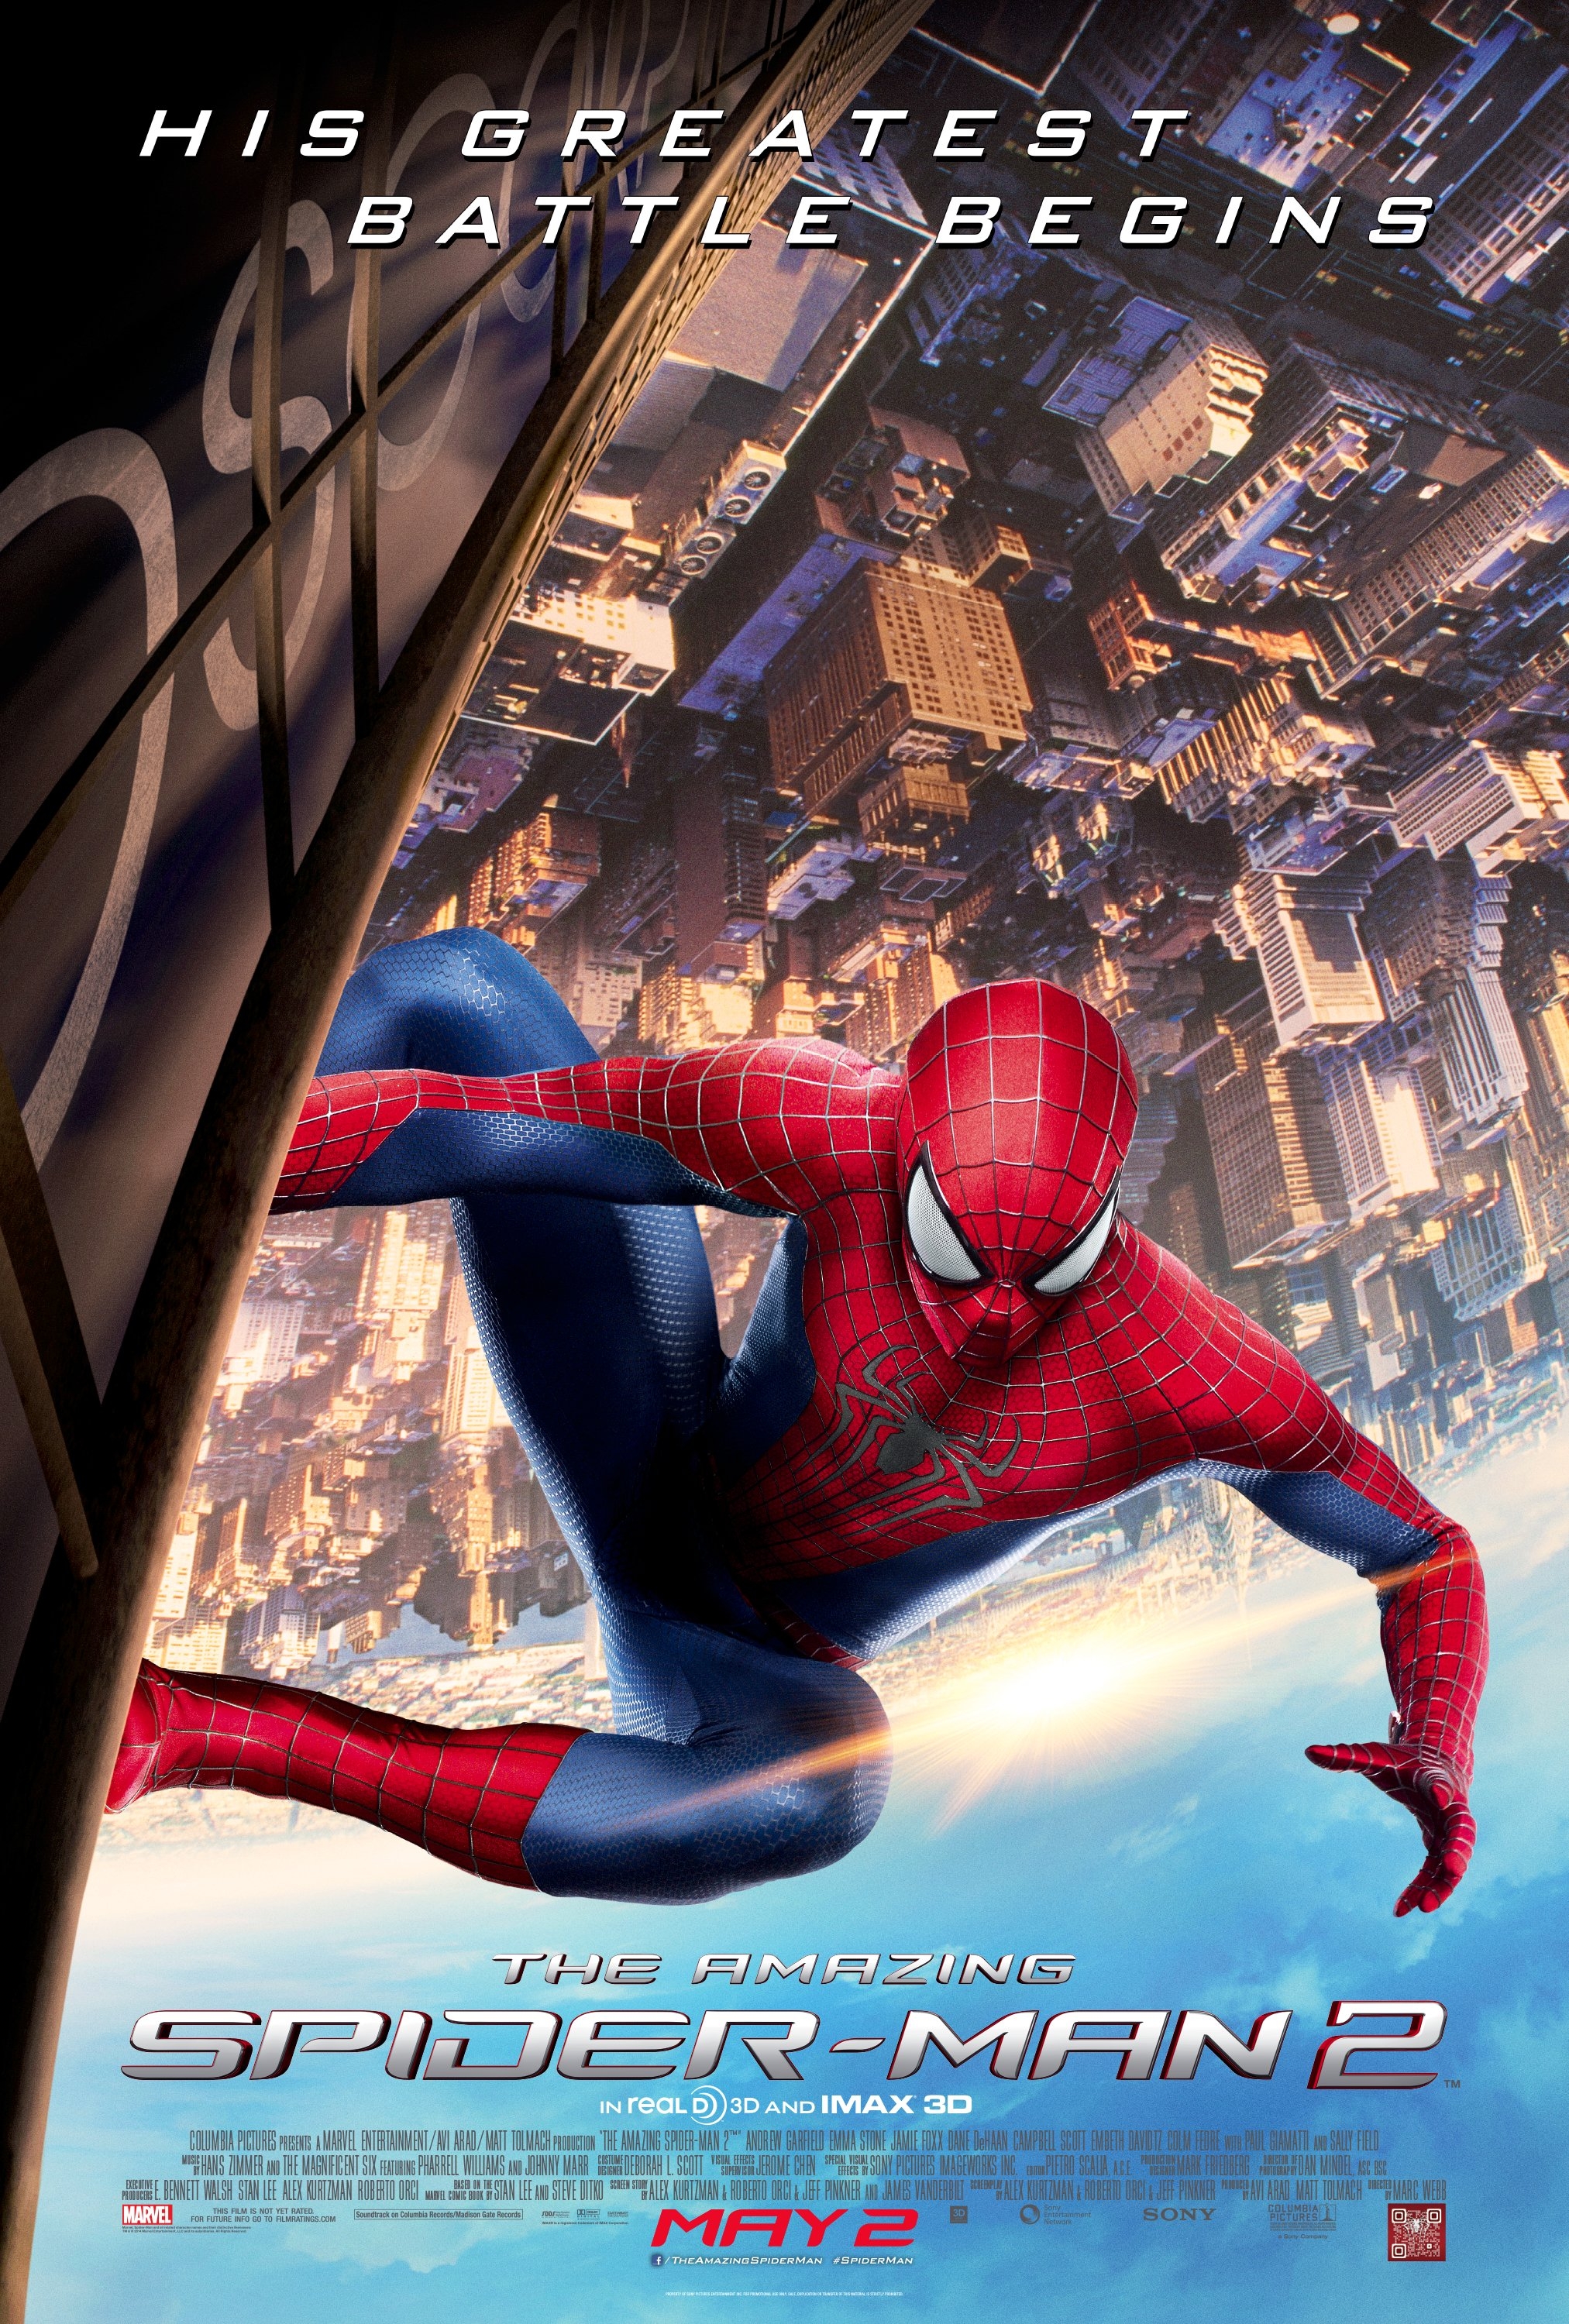 Thoughts on The Amazing Spider-Man 2